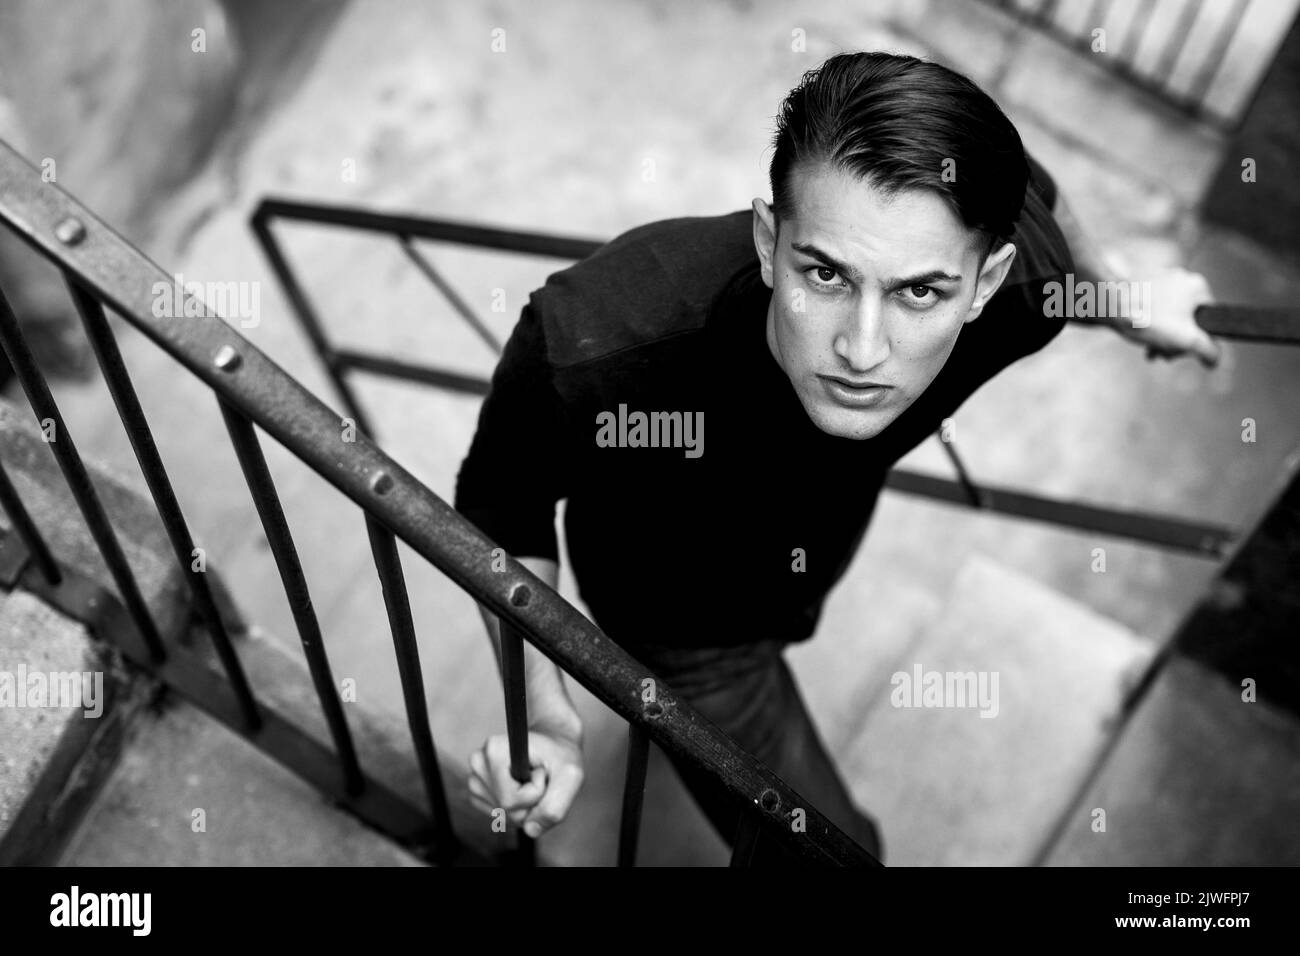 Portrait of a handsome young man on a street staircase. Black and white photo. Stock Photo